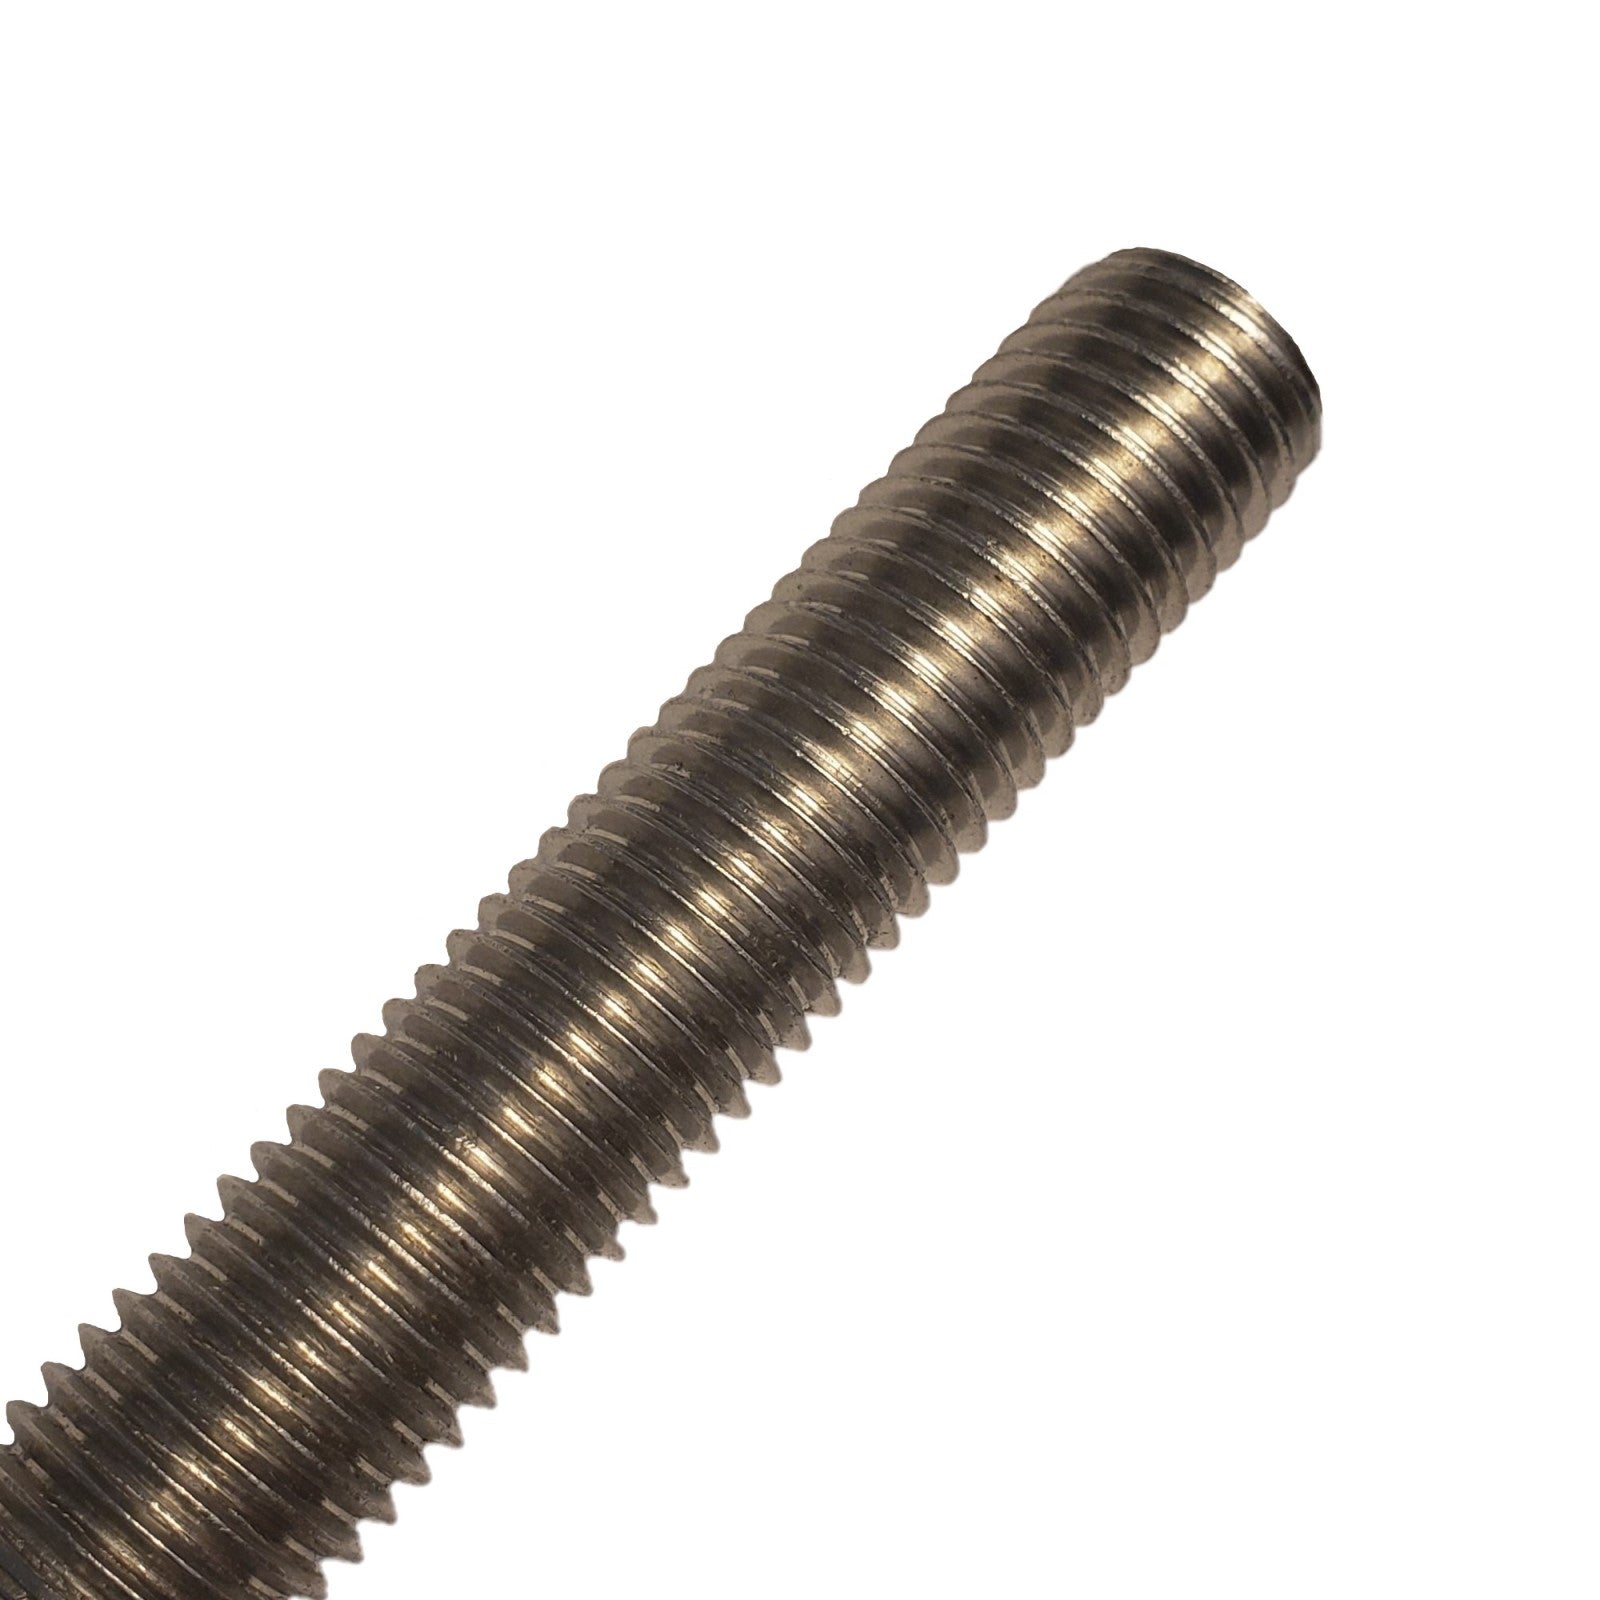 34 inch10 x 36 inch 316 Stainless Steel Threaded Rod